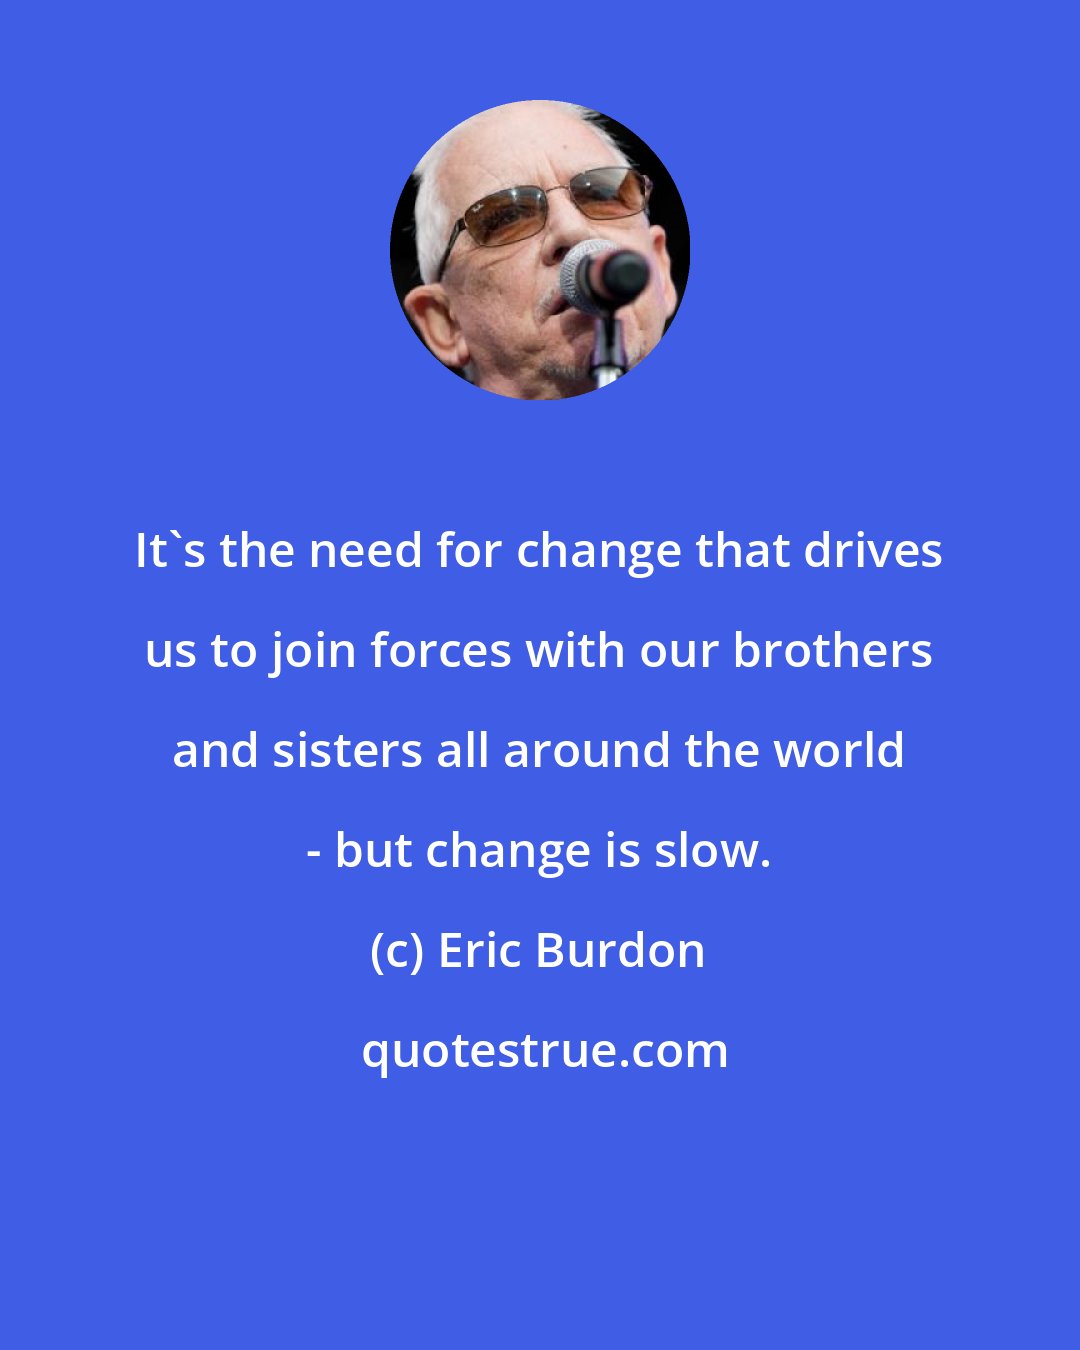 Eric Burdon: It's the need for change that drives us to join forces with our brothers and sisters all around the world - but change is slow.